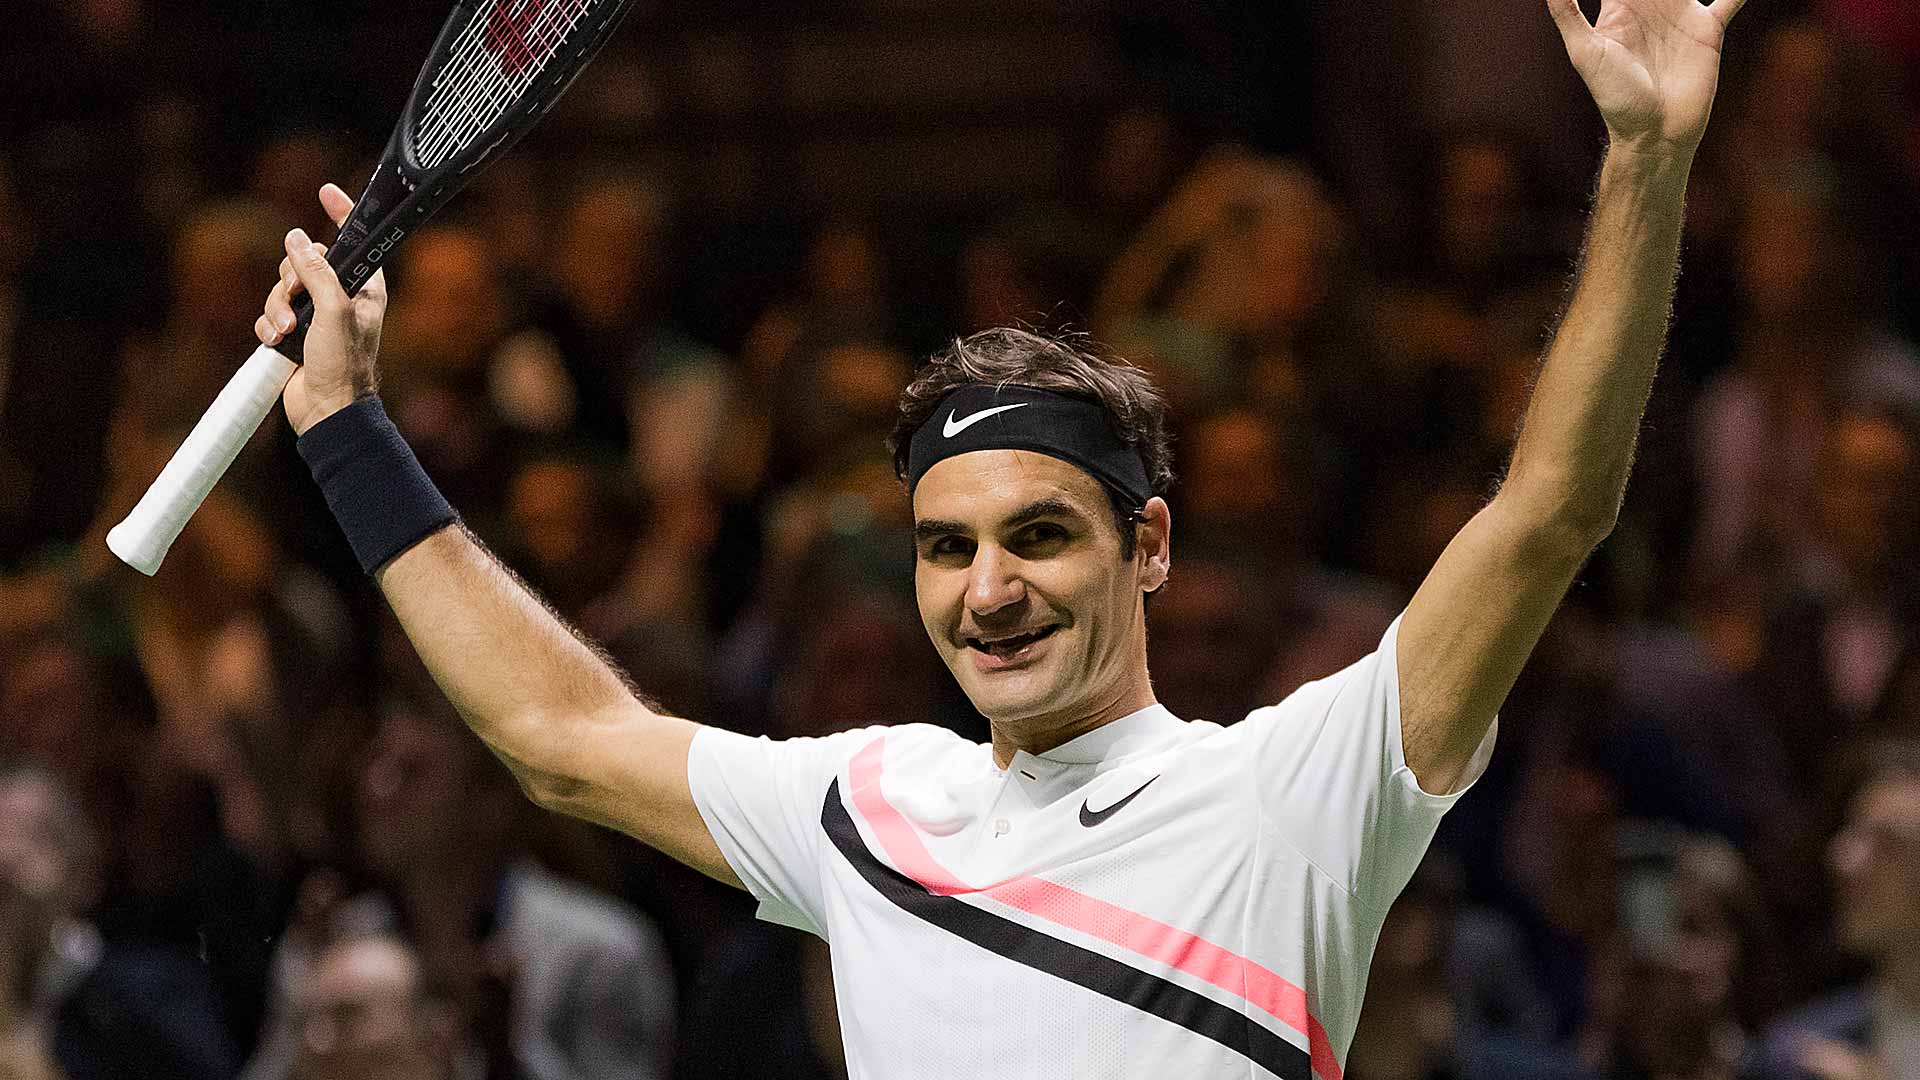 Roger Federer wins his 97th ATP World Tour title at the ABN AMRO World Tennis Tournament after beating Grigor Dimitrov in Sunday's final.